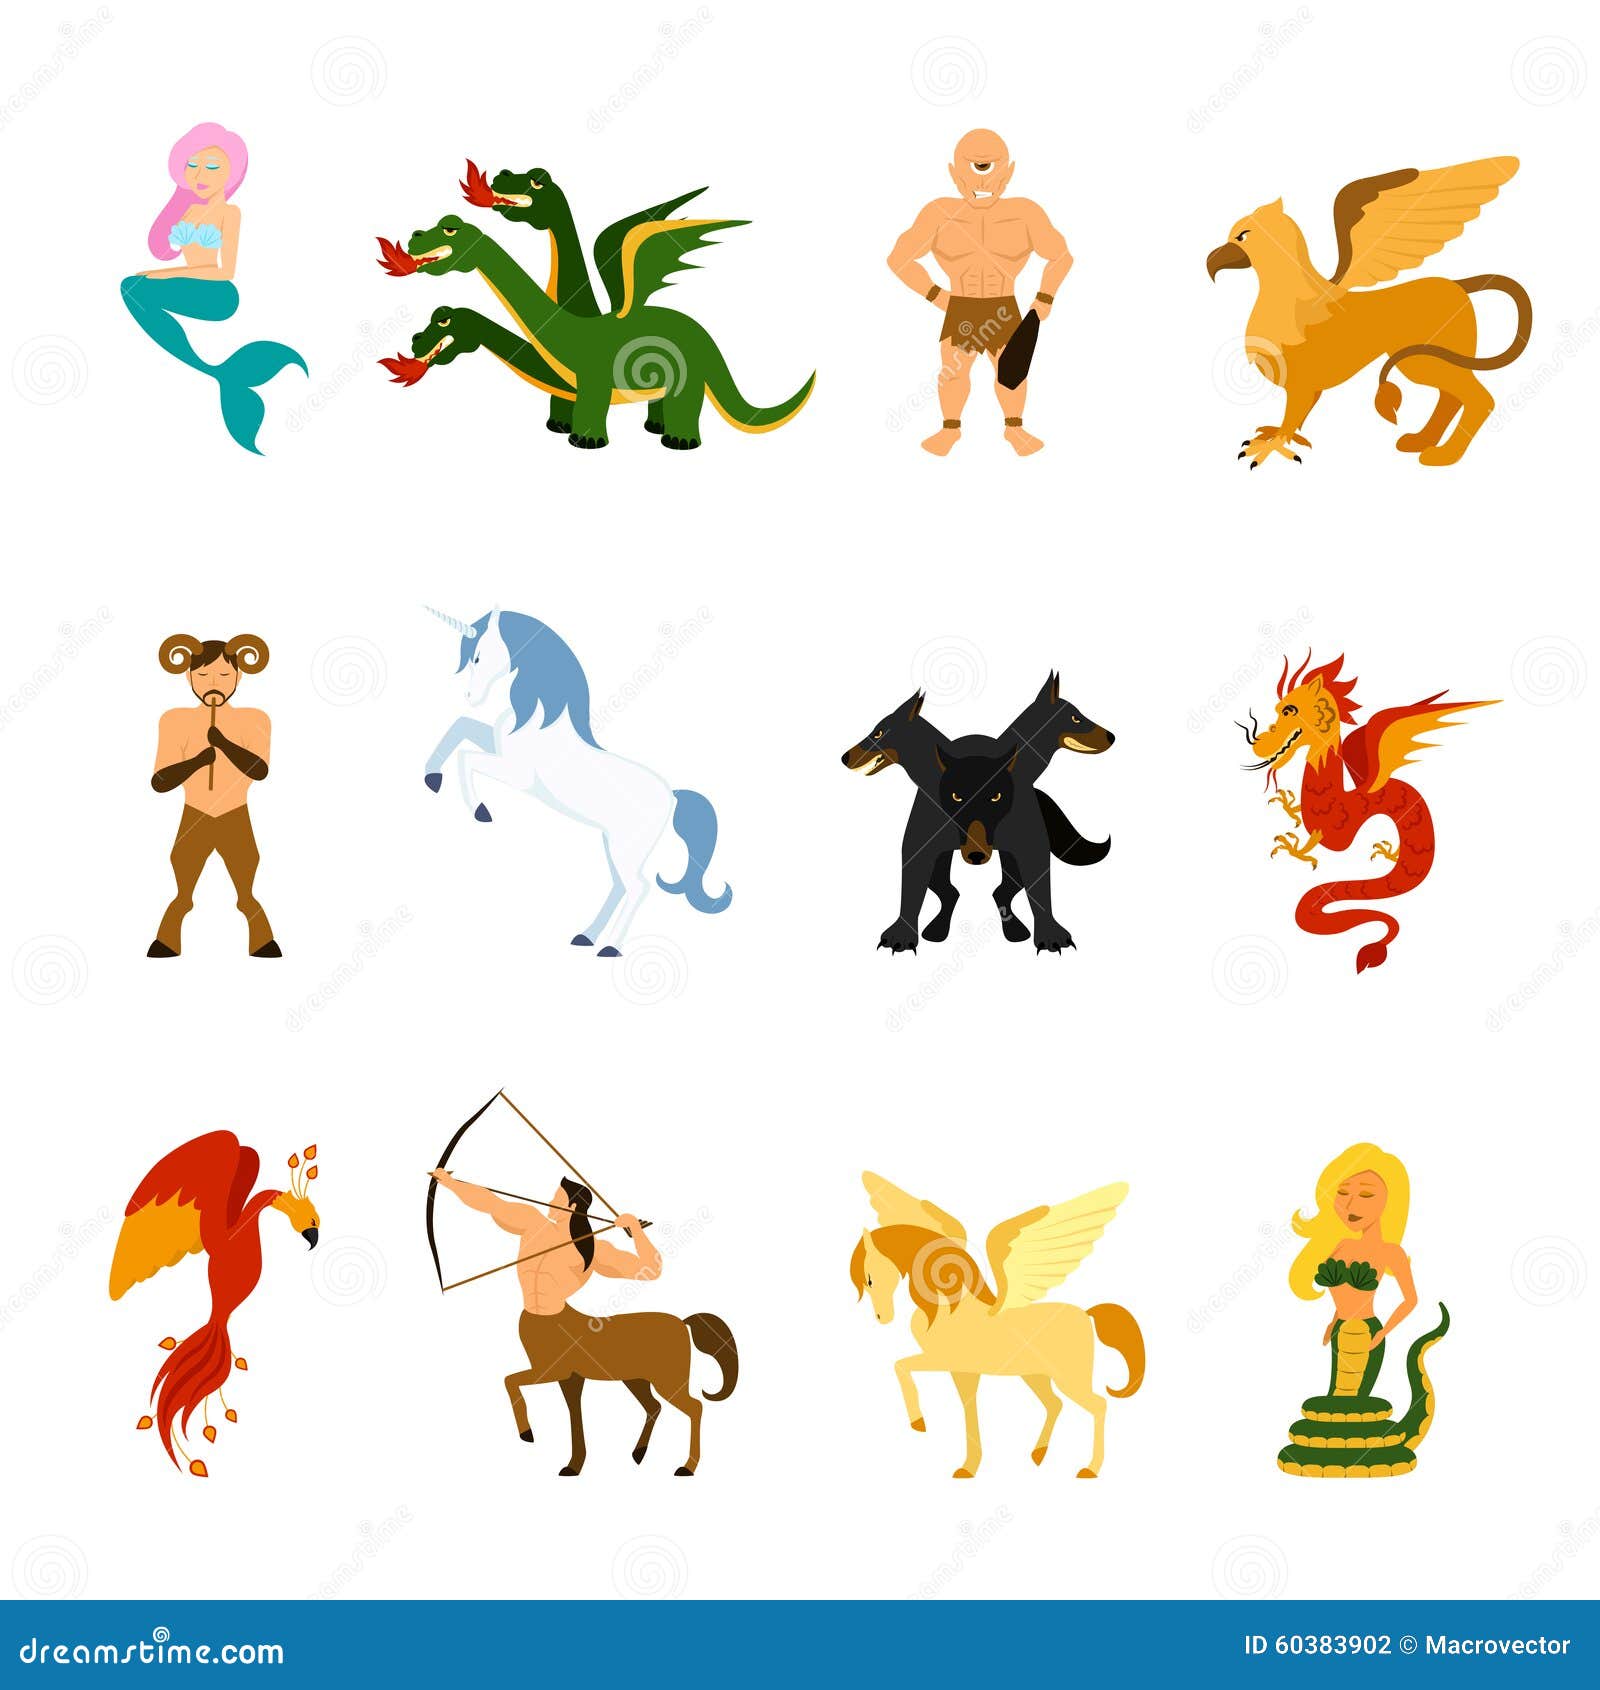 mythical creature images set